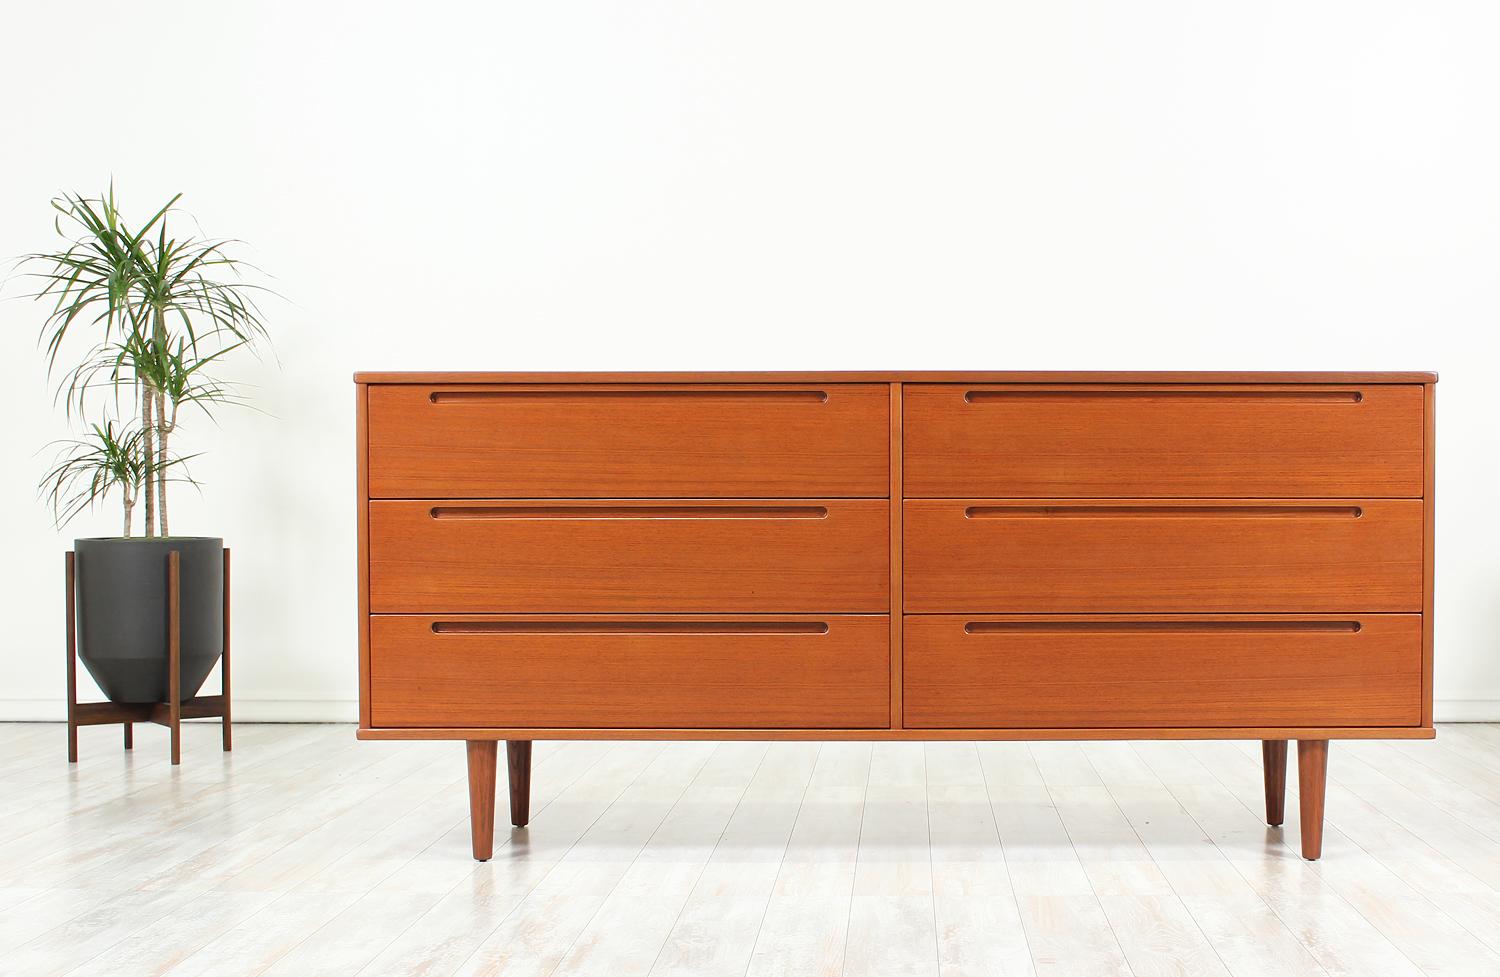 Beautiful dresser designed by Nils Jönsson for HJN Møbler in Denmark circa 1960’s. This stunning six drawer dresser is comprised of teak wood and features a rich teak toned case with beautiful grain detail throughout. The classic, tapered legs are